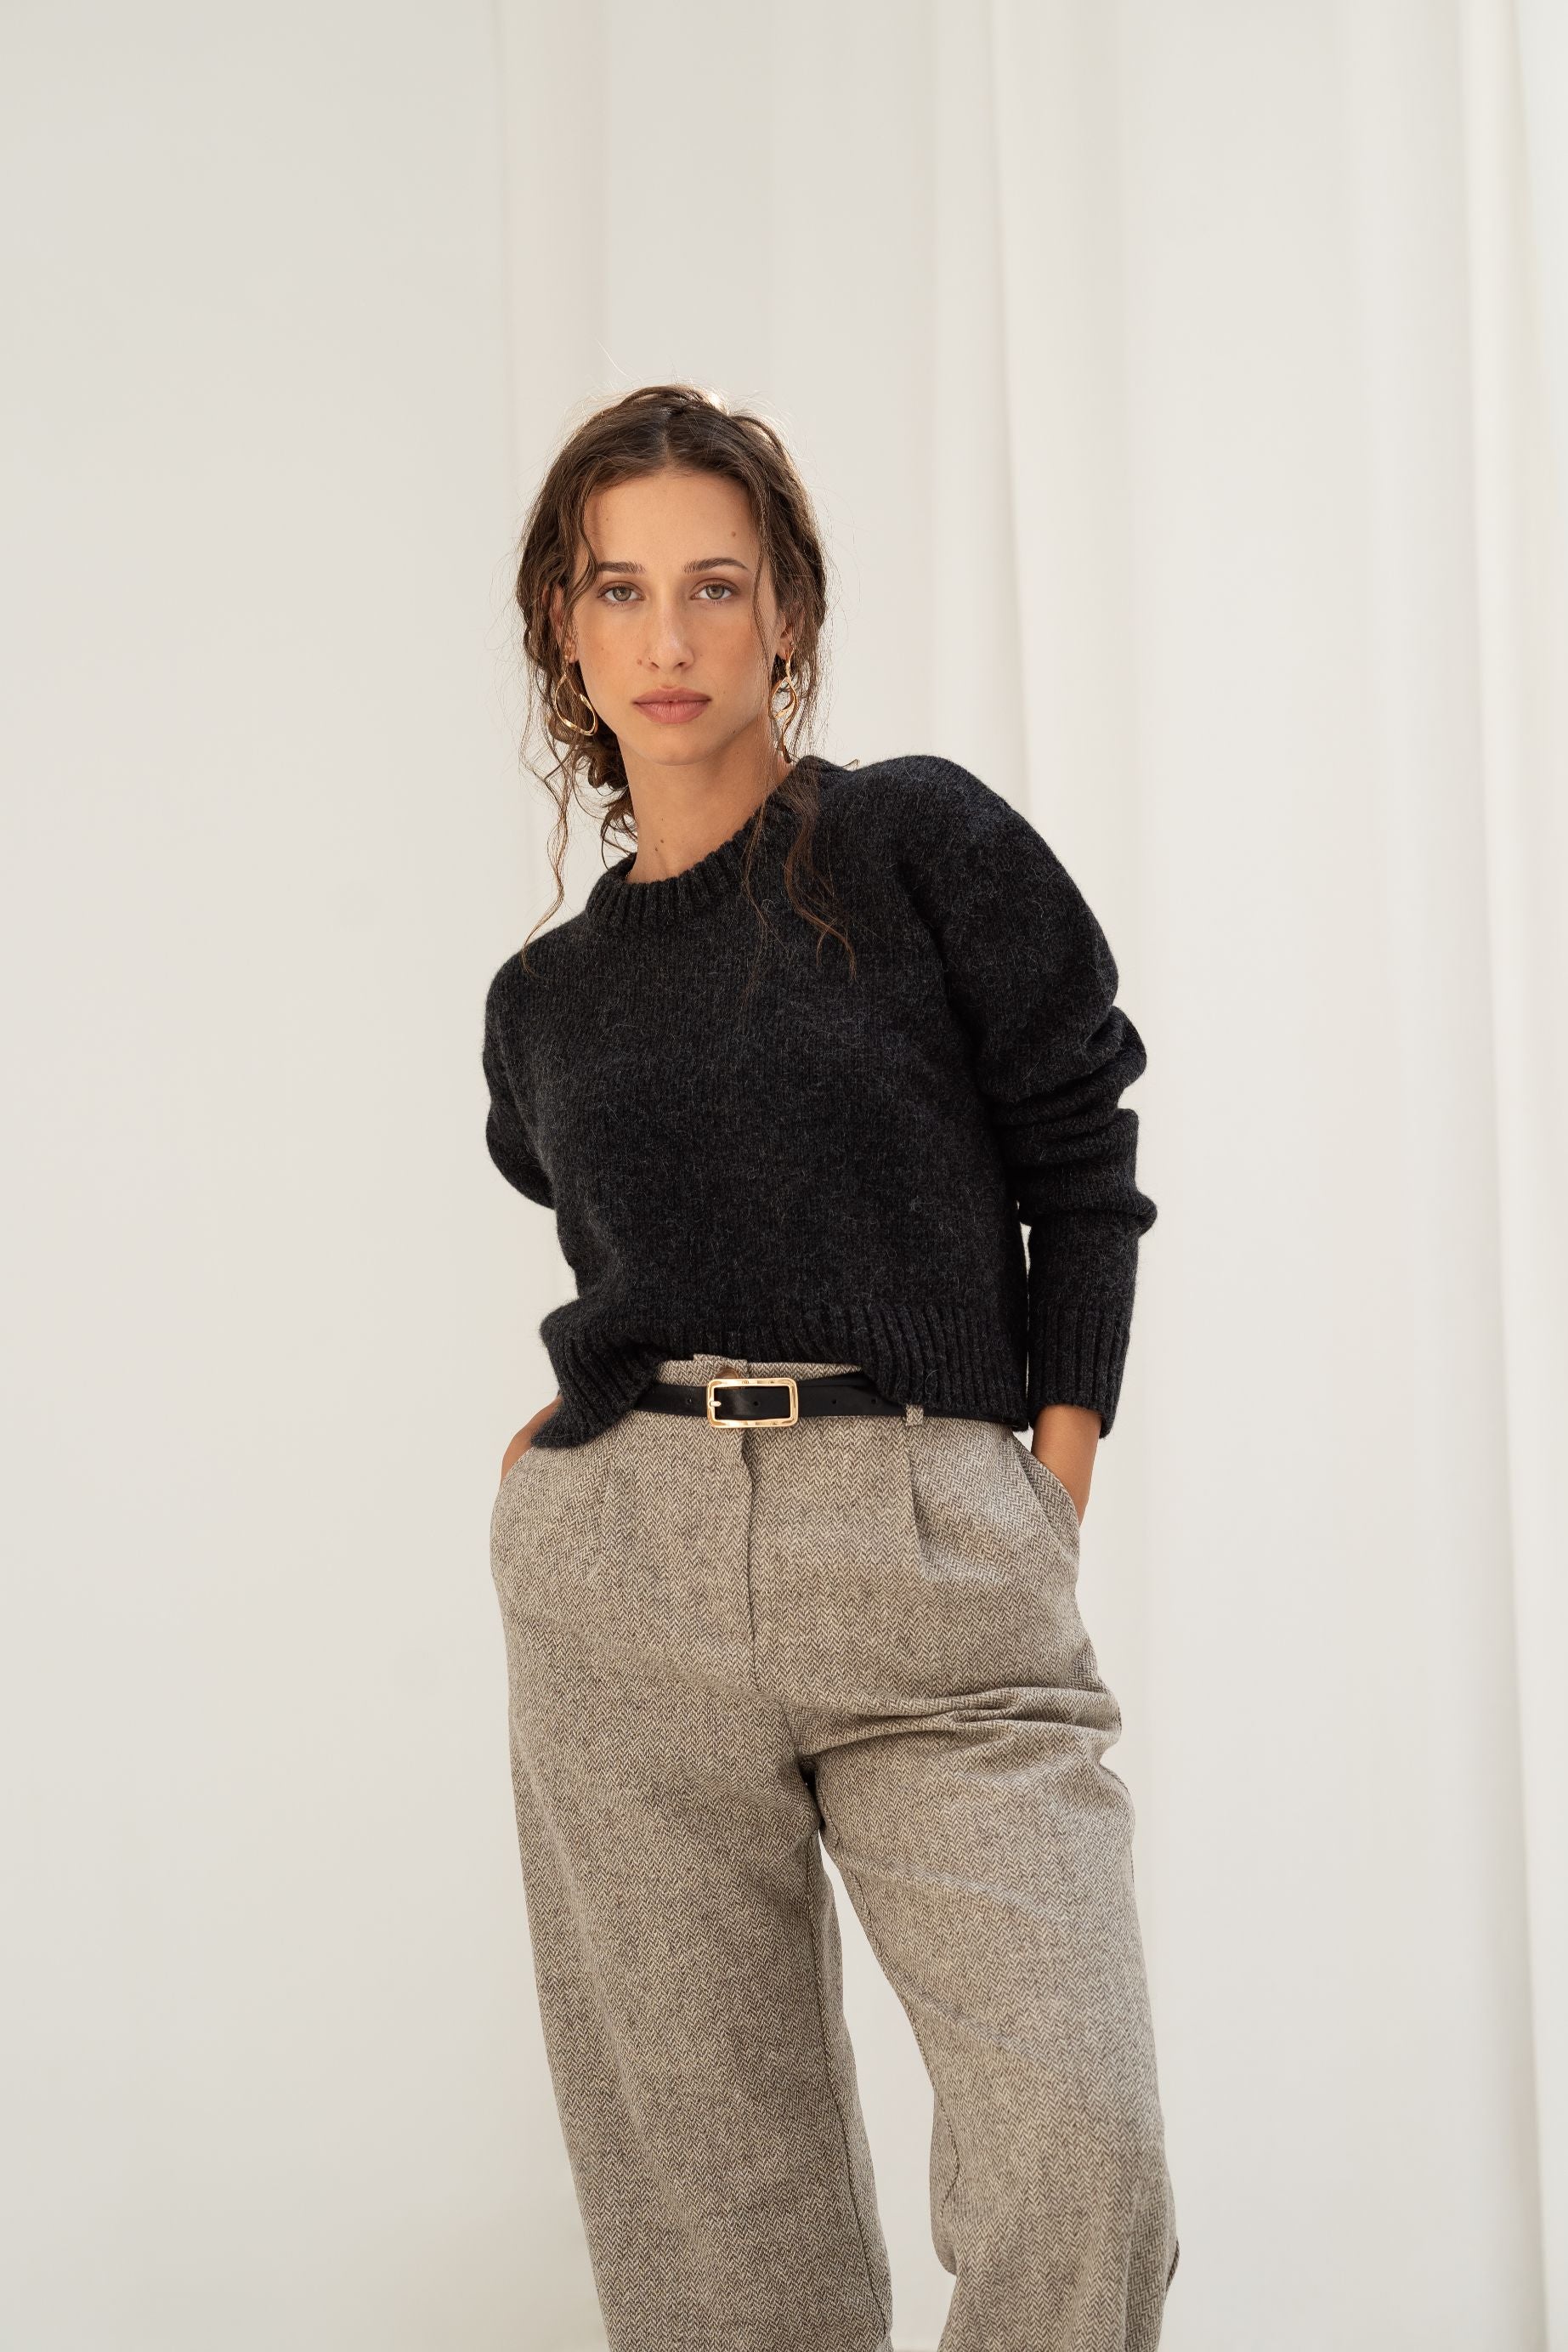 Sustainable warmth: Women's crewneck jumper made from recycled wool & alpaca blend in black.